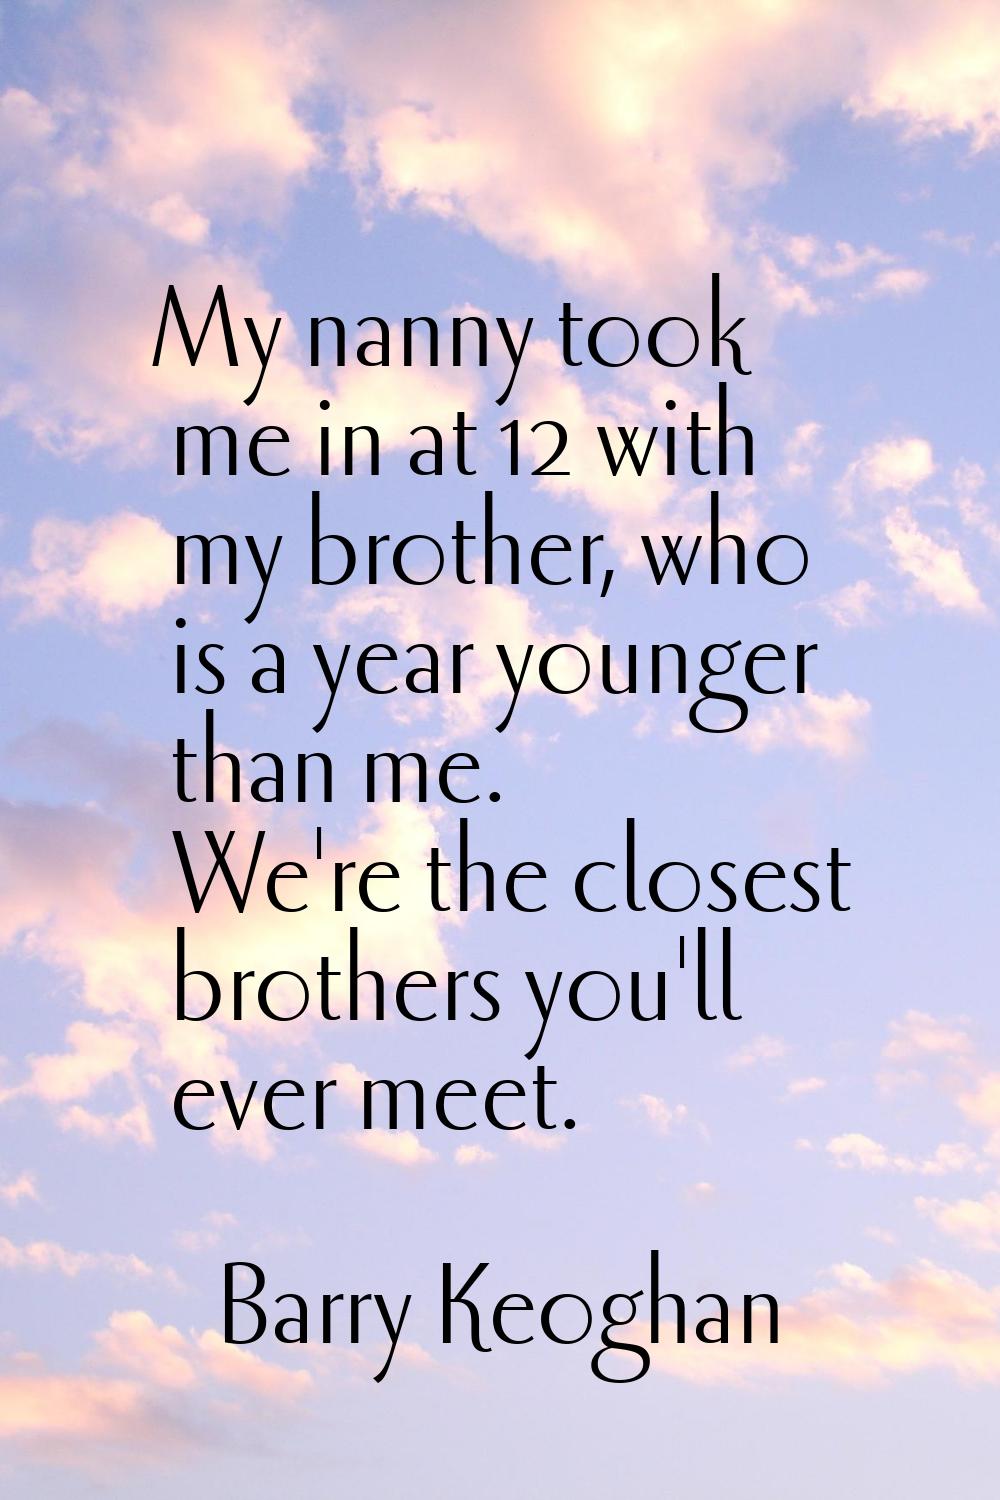 My nanny took me in at 12 with my brother, who is a year younger than me. We're the closest brother